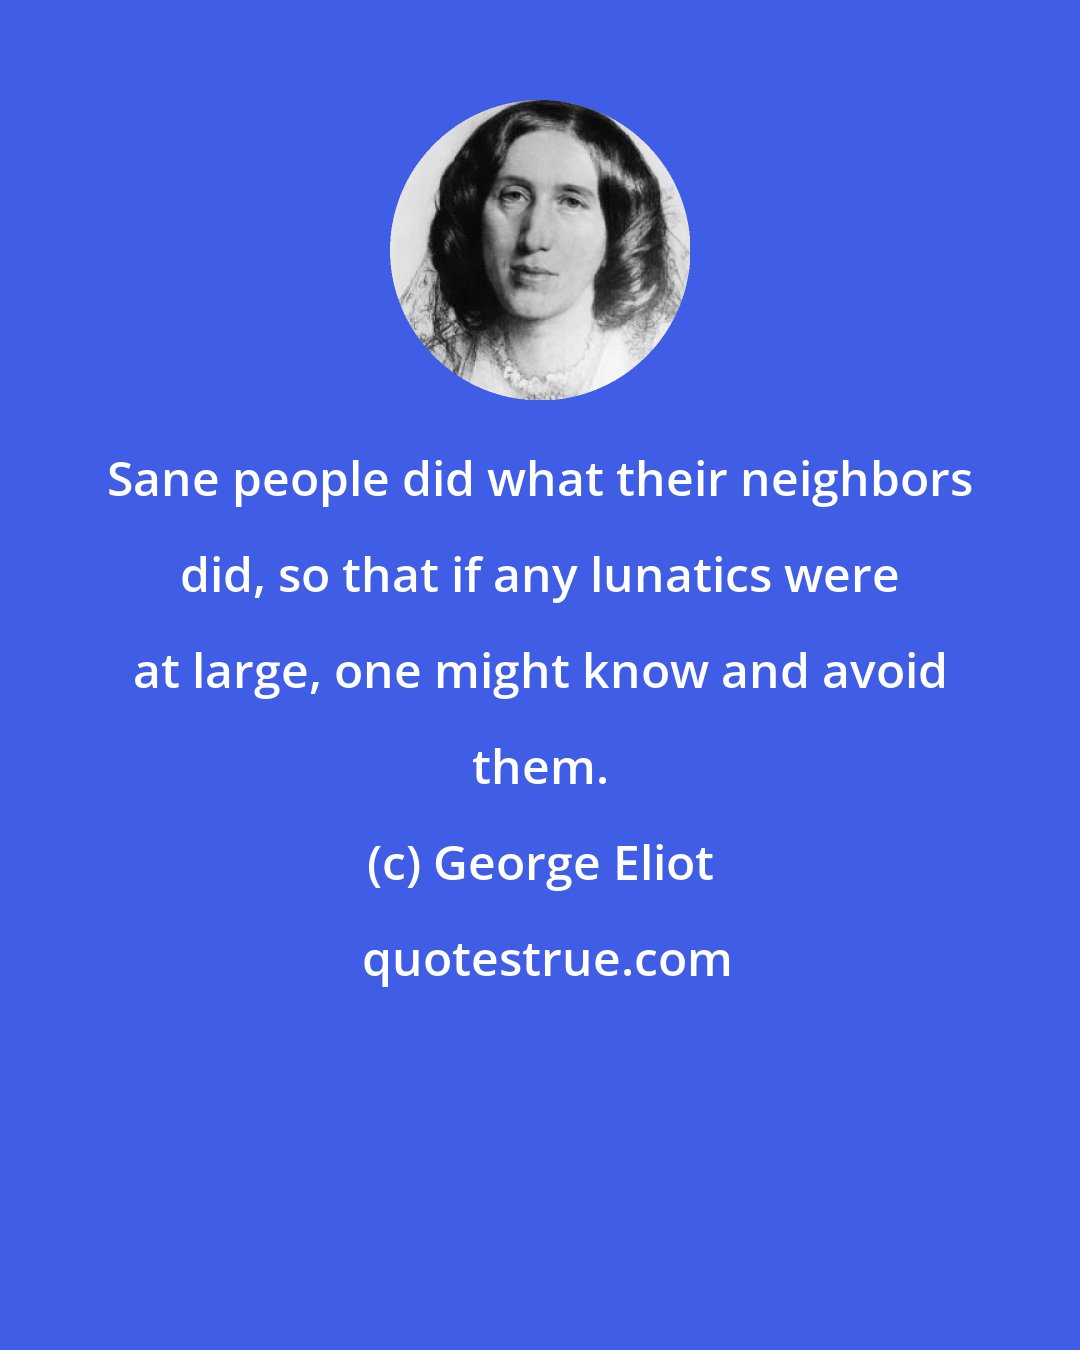 George Eliot: Sane people did what their neighbors did, so that if any lunatics were at large, one might know and avoid them.